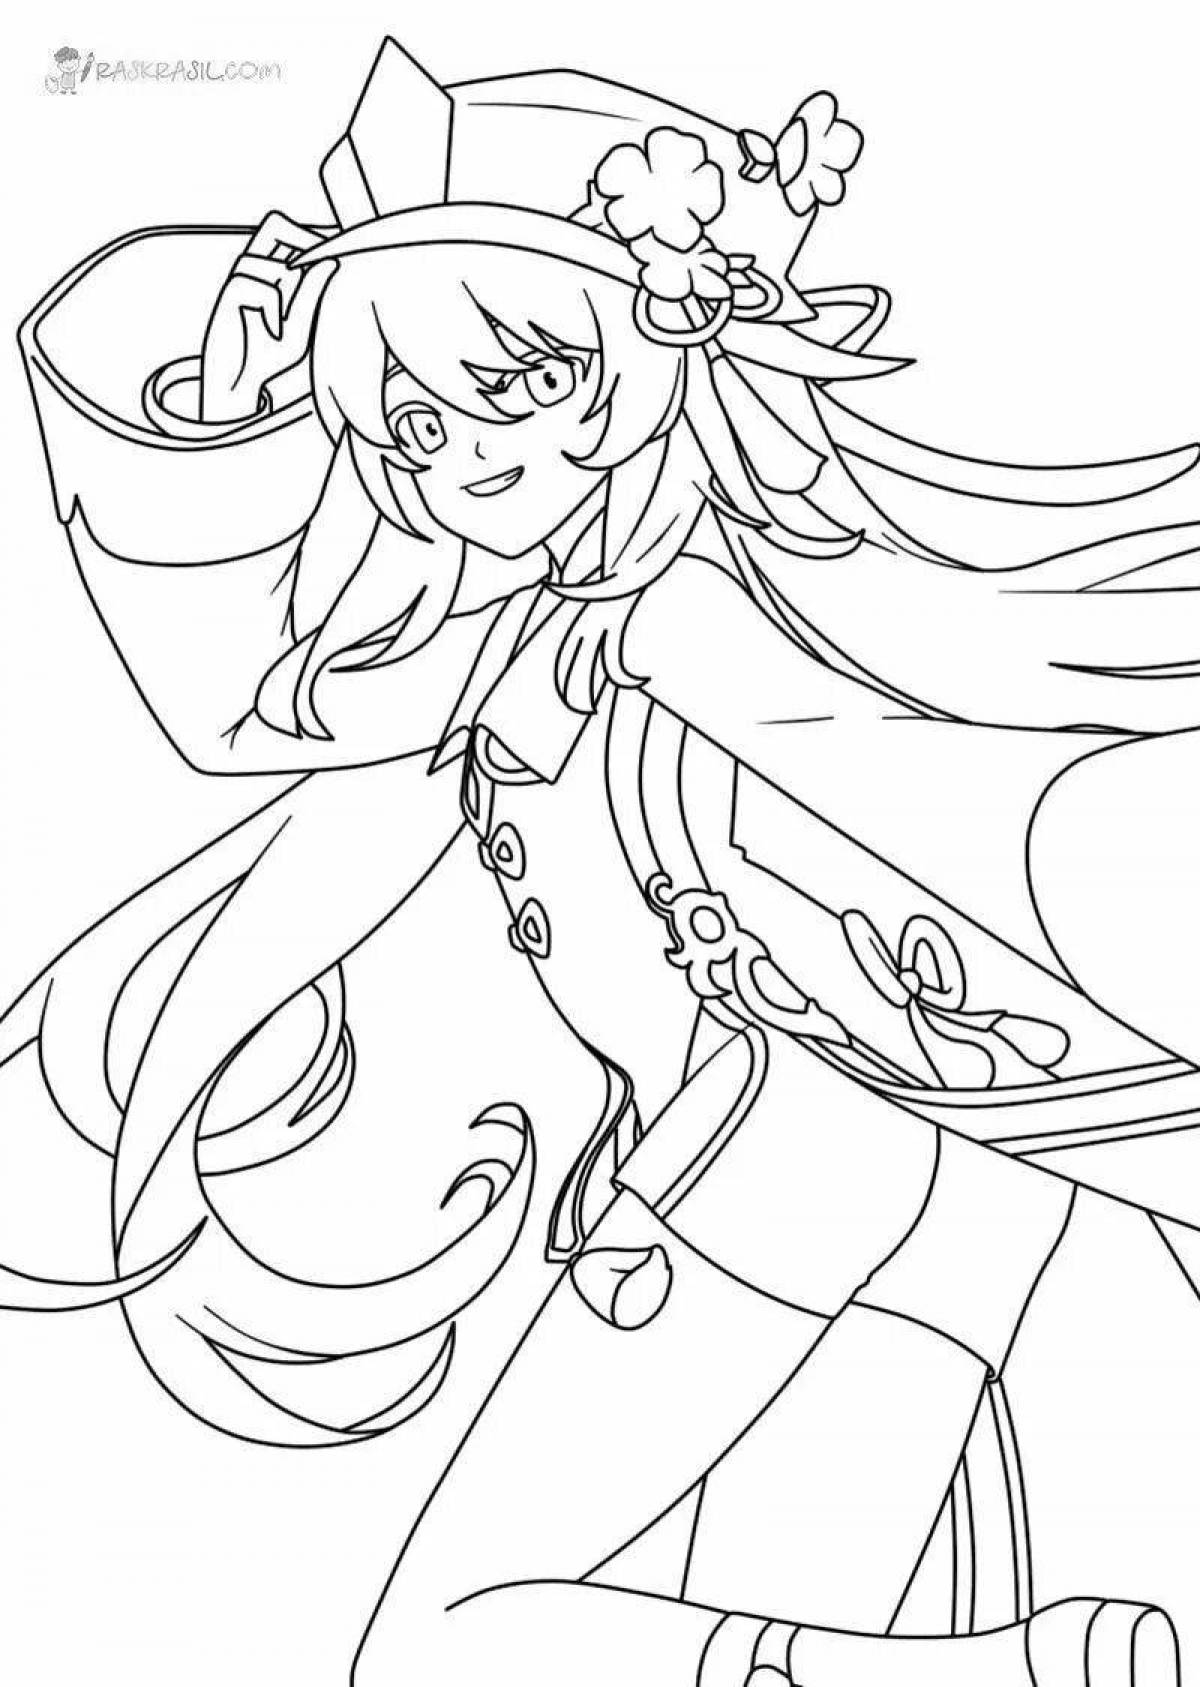 Cute Itzi coloring page